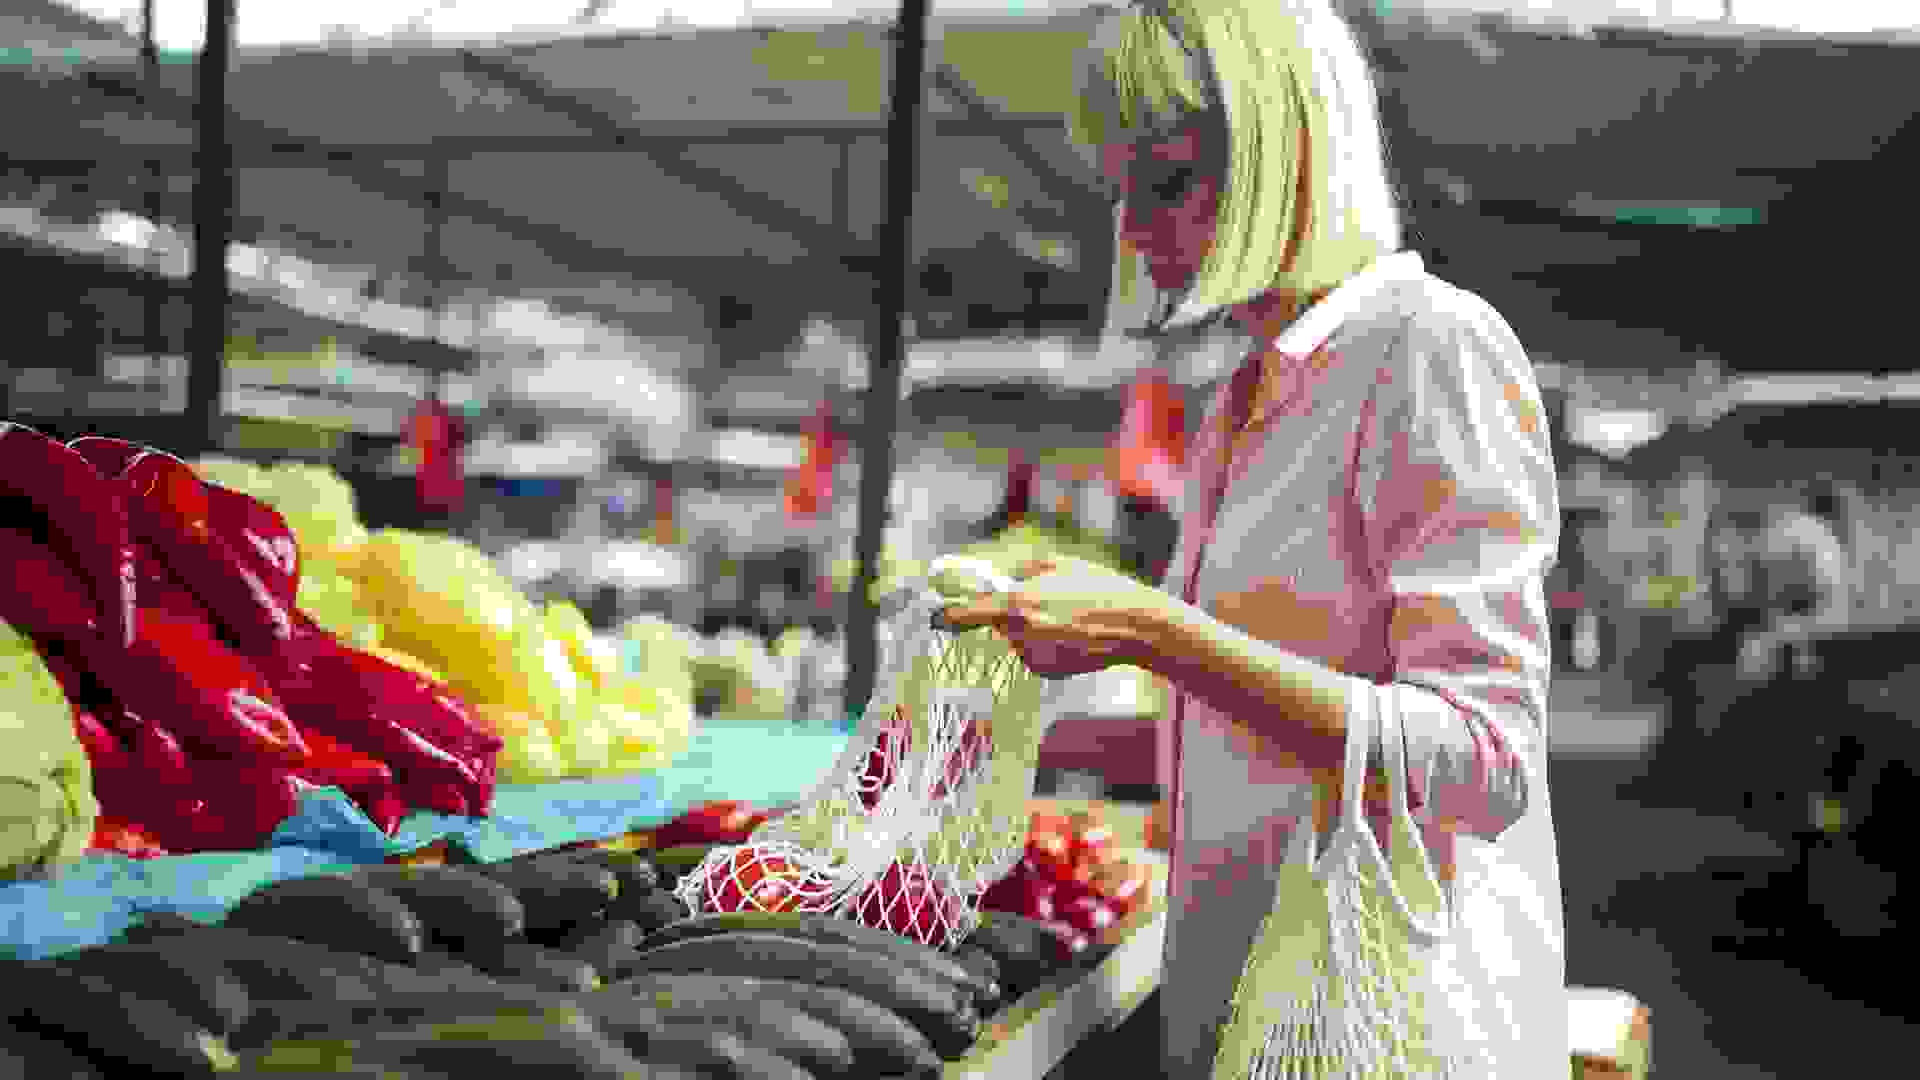 A beautiful woman is shopping for organic food at the market. stock photo